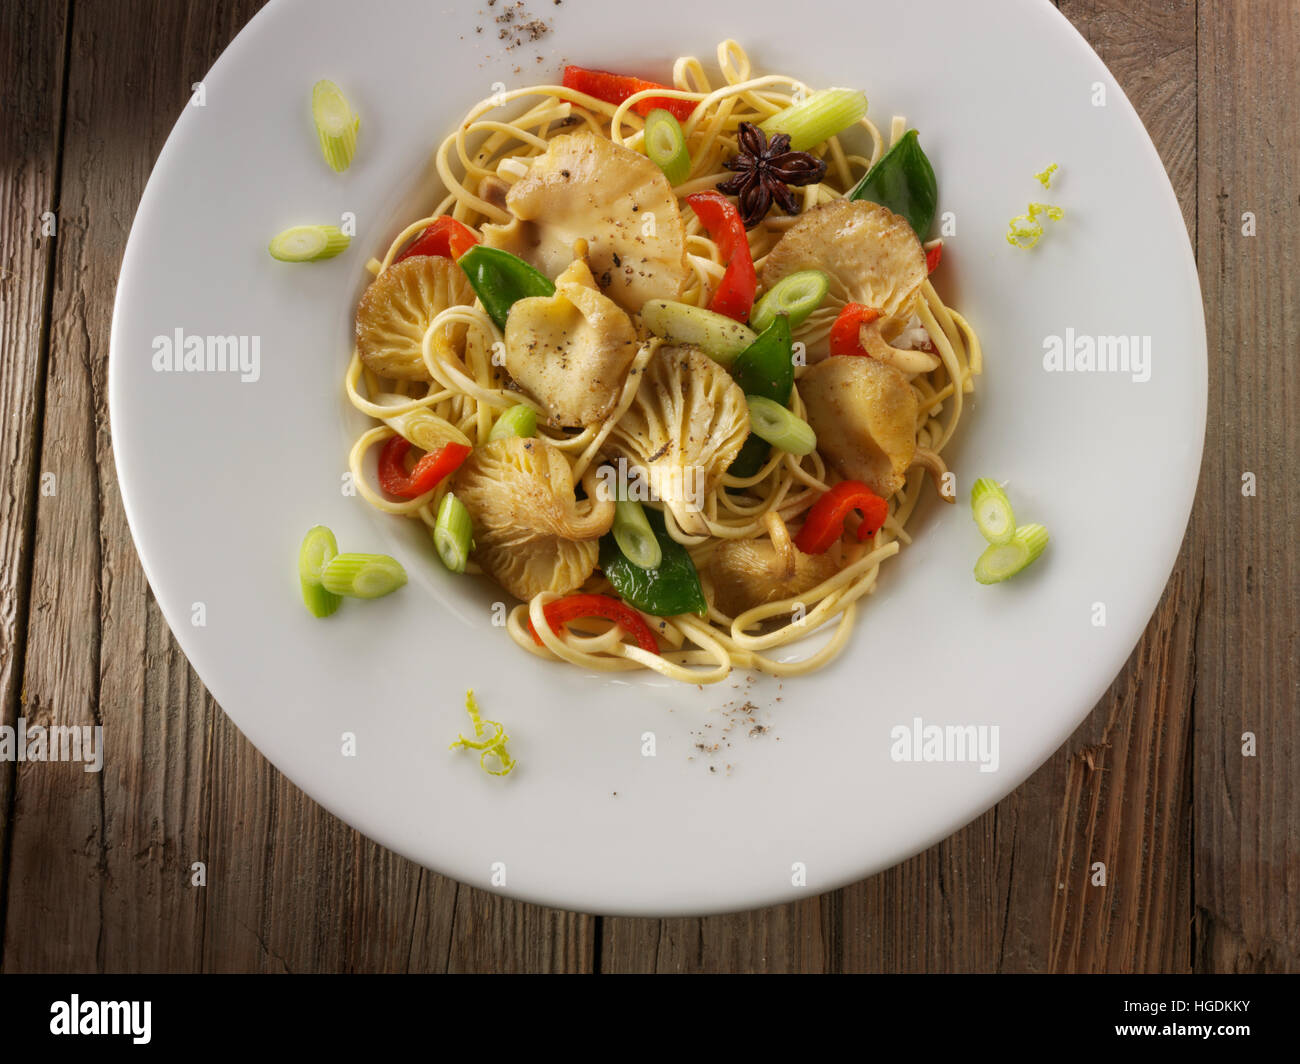 Yellow Oyster mushroom stir fry with noodles, mange tout, red pepper, spring onions and anise Stock Photo